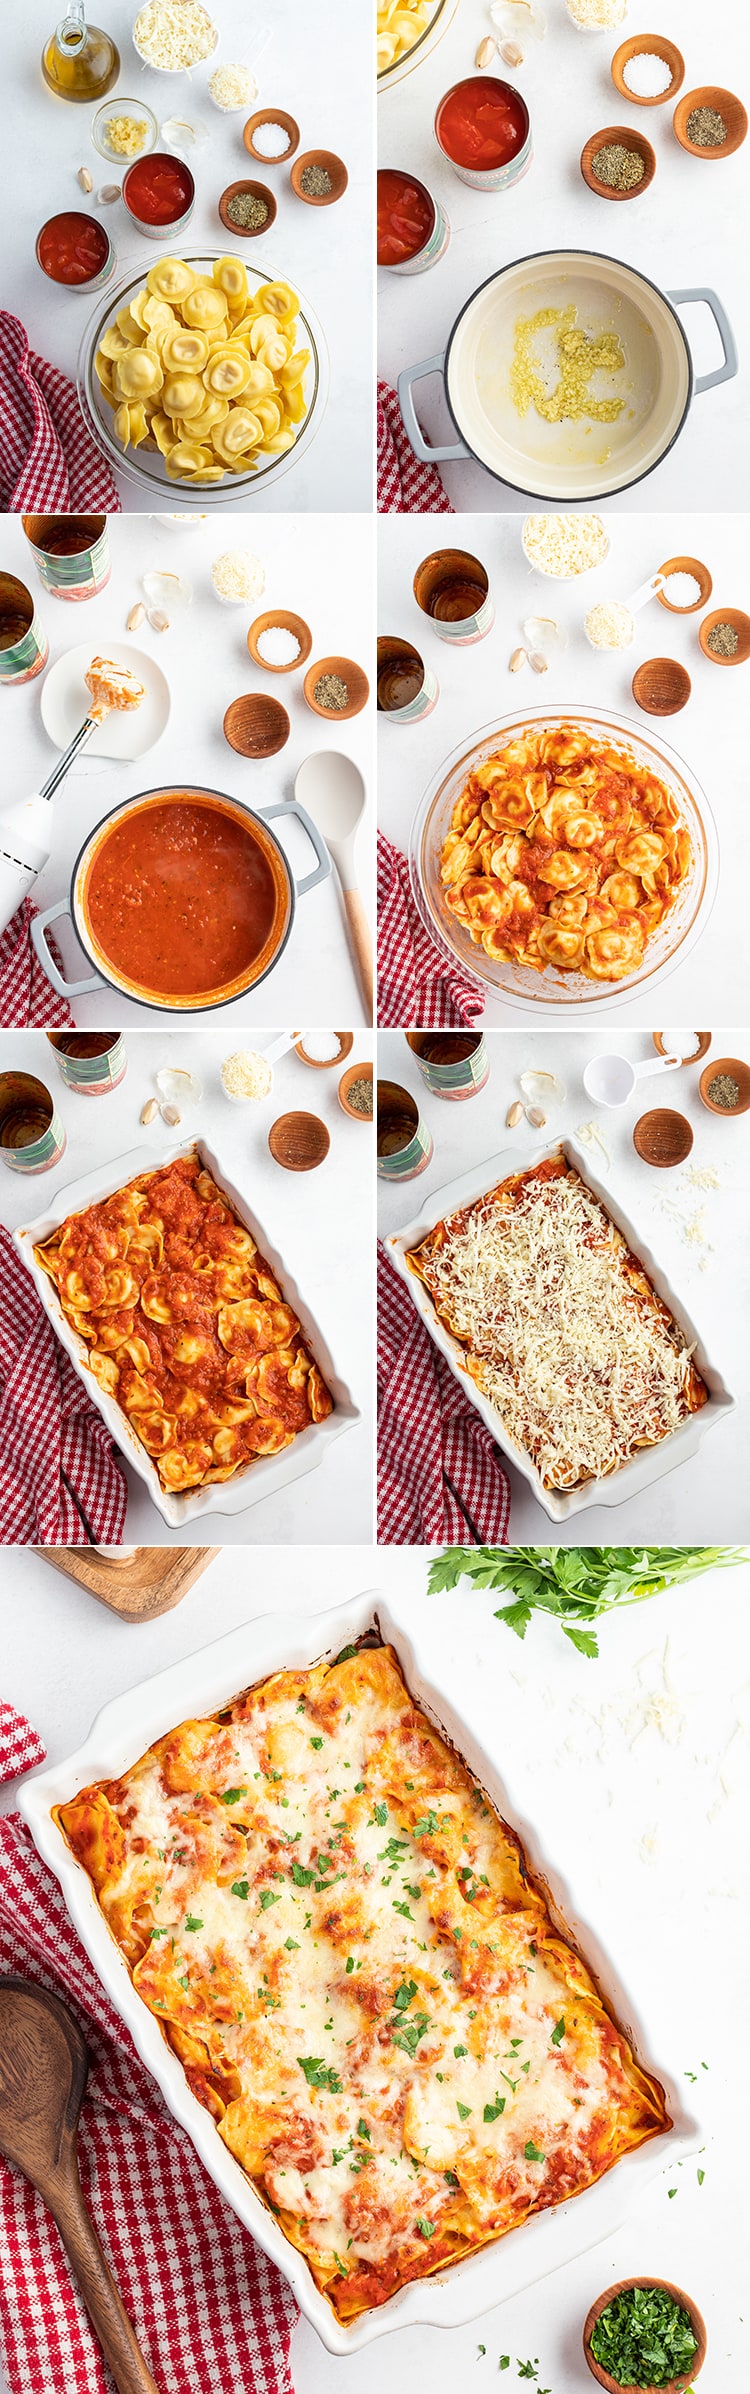 Step by step photos of how to make baked ravioli.